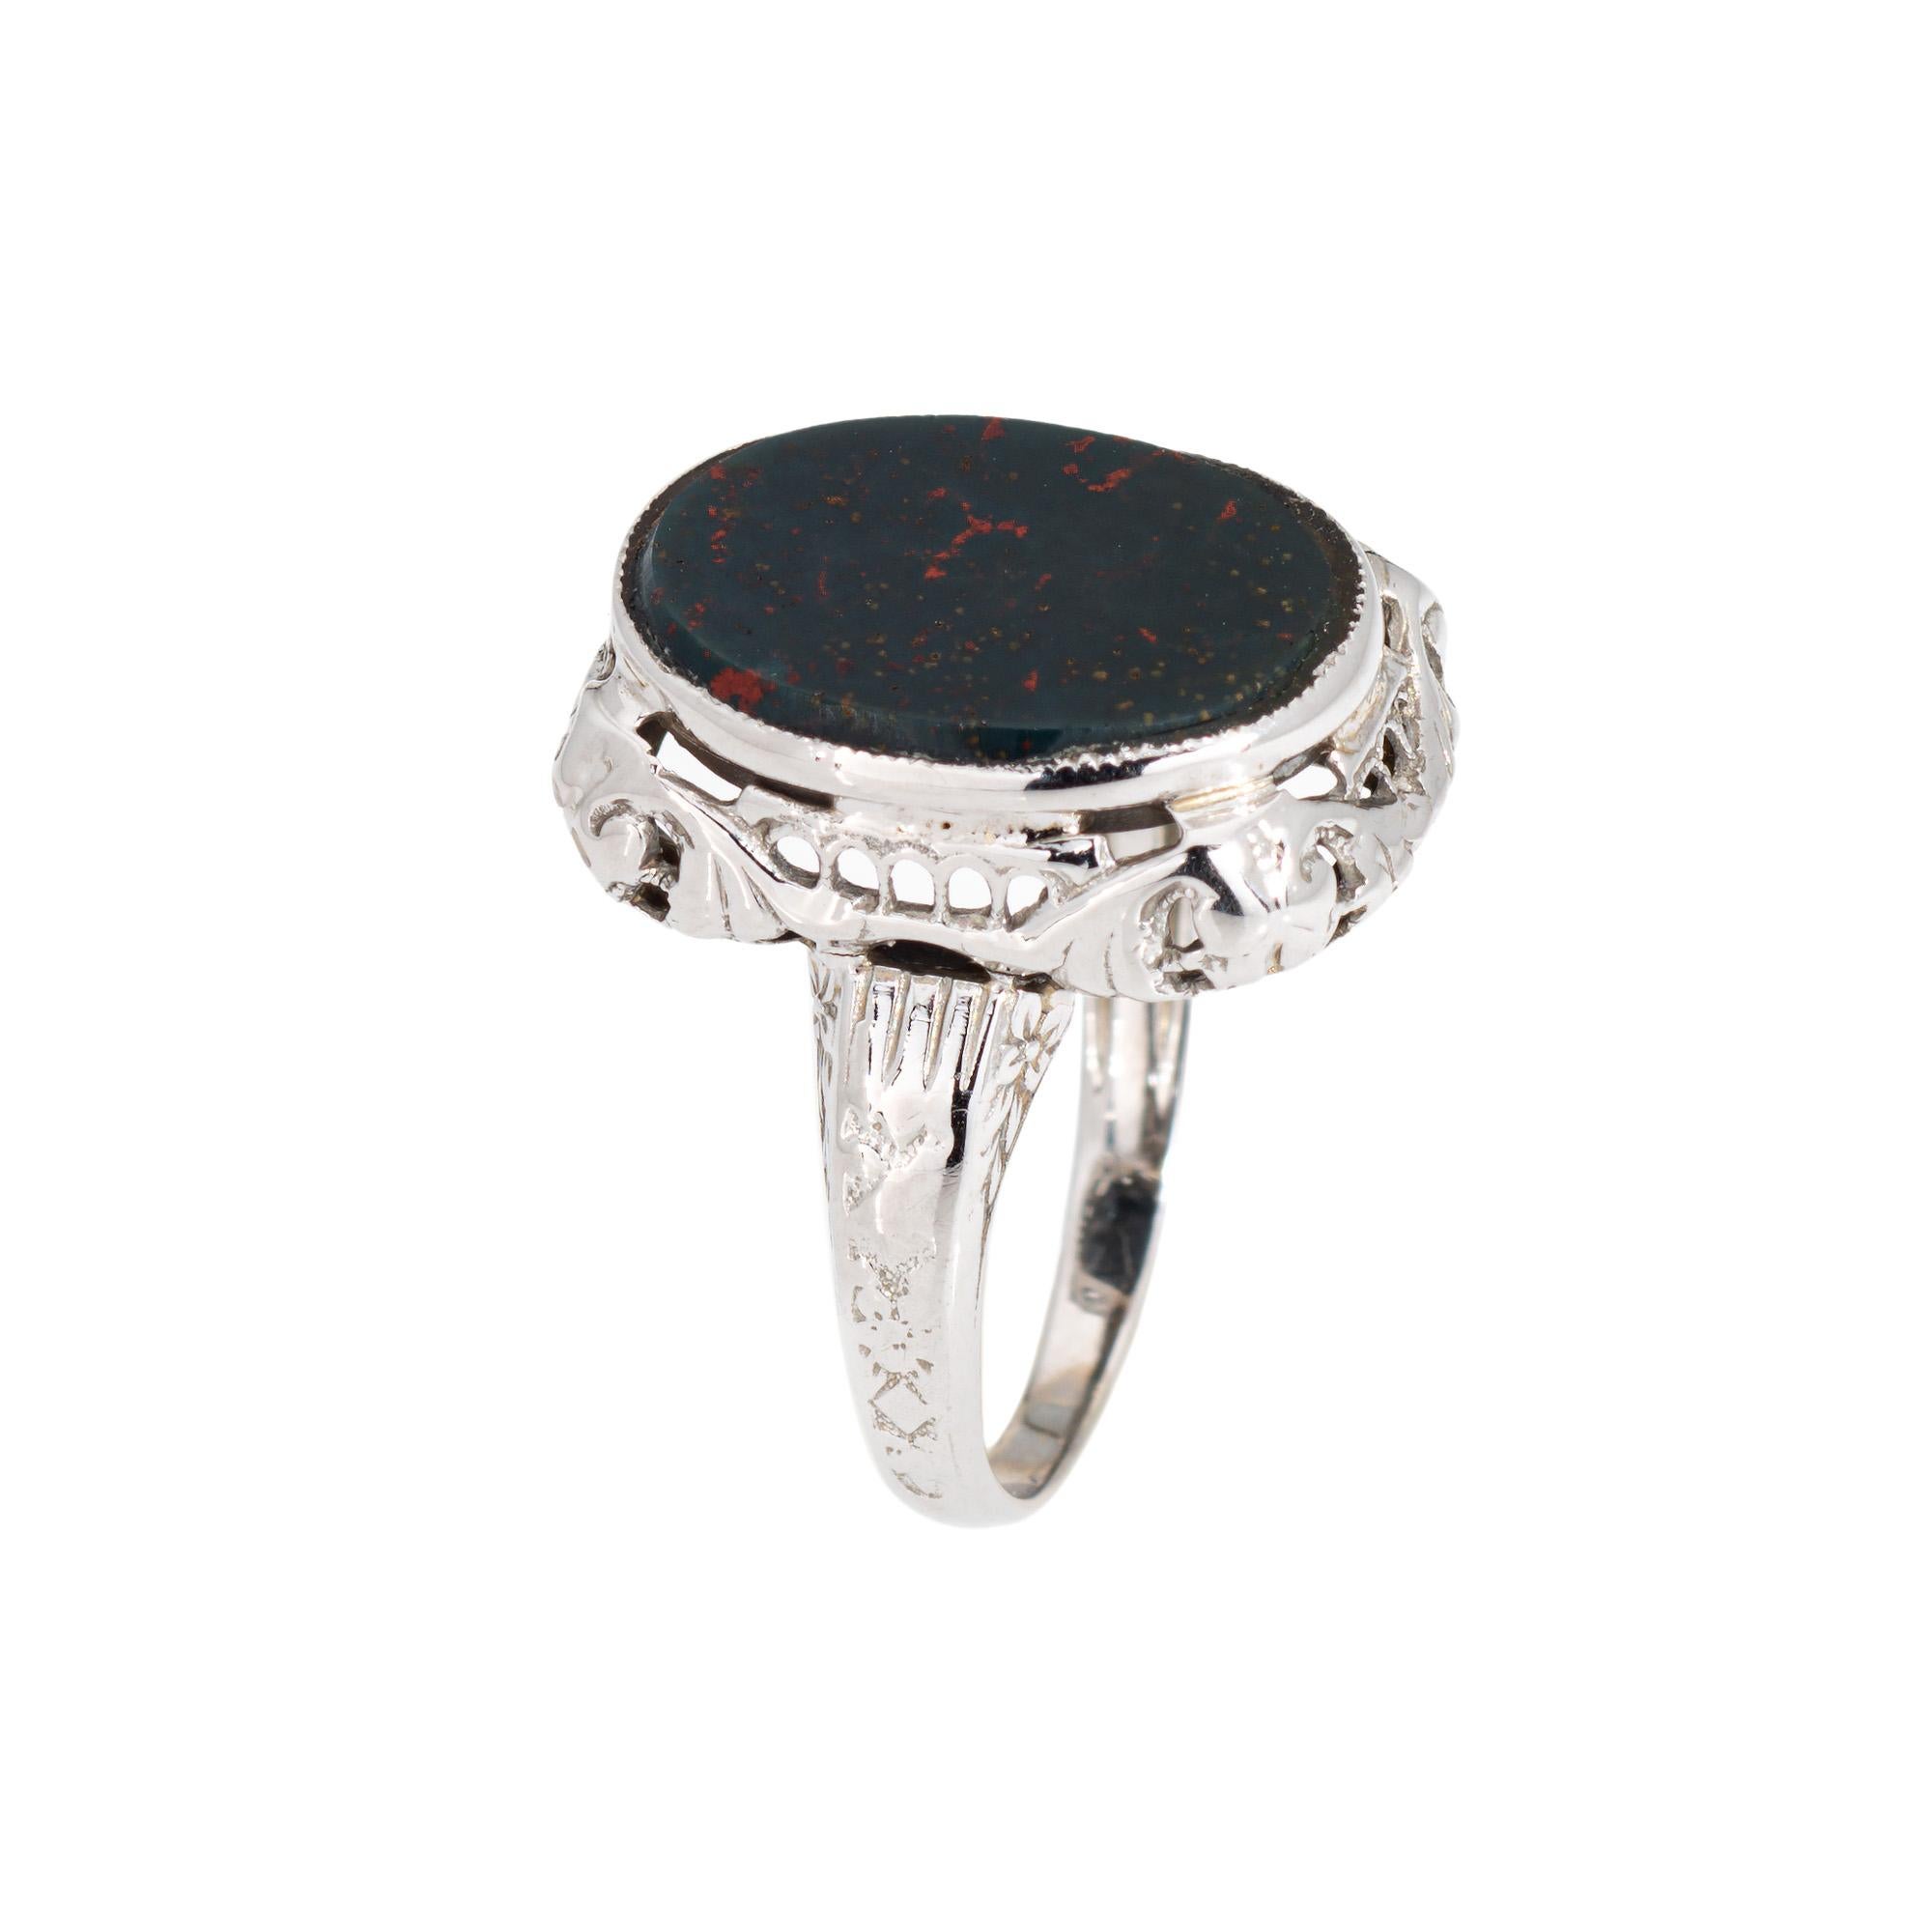 Stylish and finely detailed Art Deco bloodstone ring crafted in 14 karat white gold (circa 1920s to 1930s).

Bloodstone measures 13.5mm x 10mm. The bloodstone is in very good condition and free of cracks or chips.

The rich dark green teal